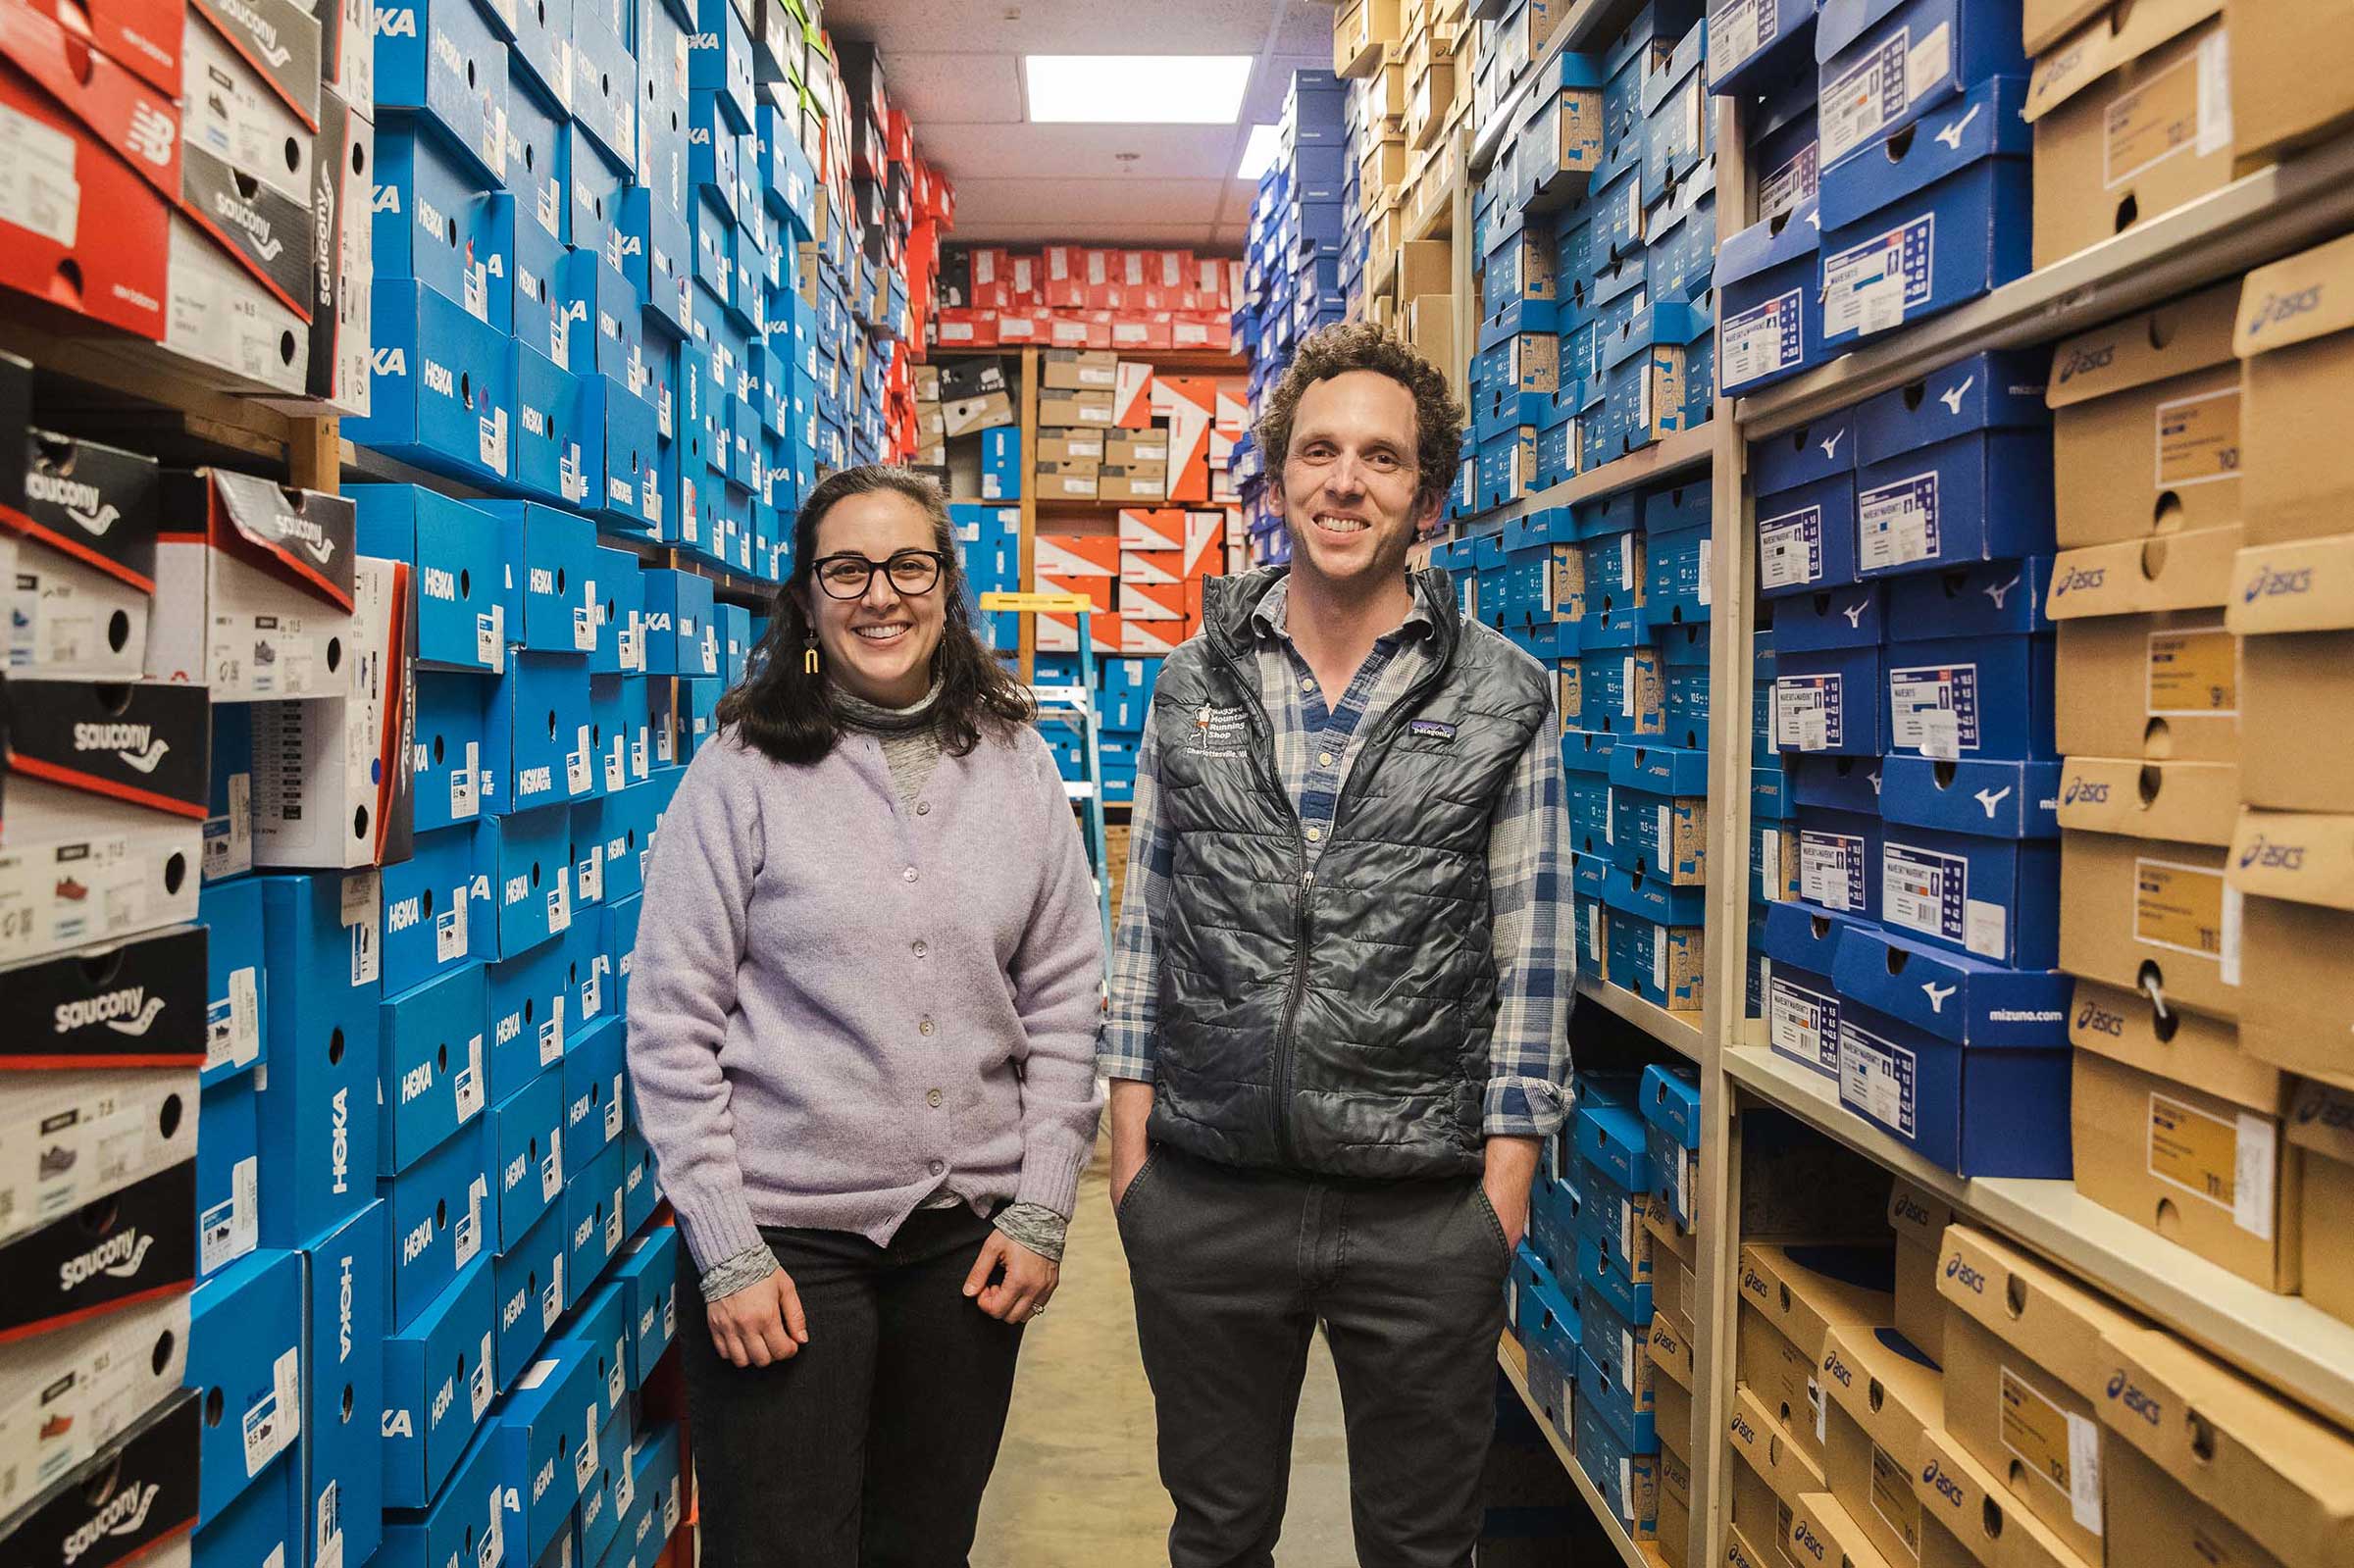 Audrey Sackson and Alec Lorenzoni standing in the running shop stock room, between two rows of shelves filled to the top with shoeboxes